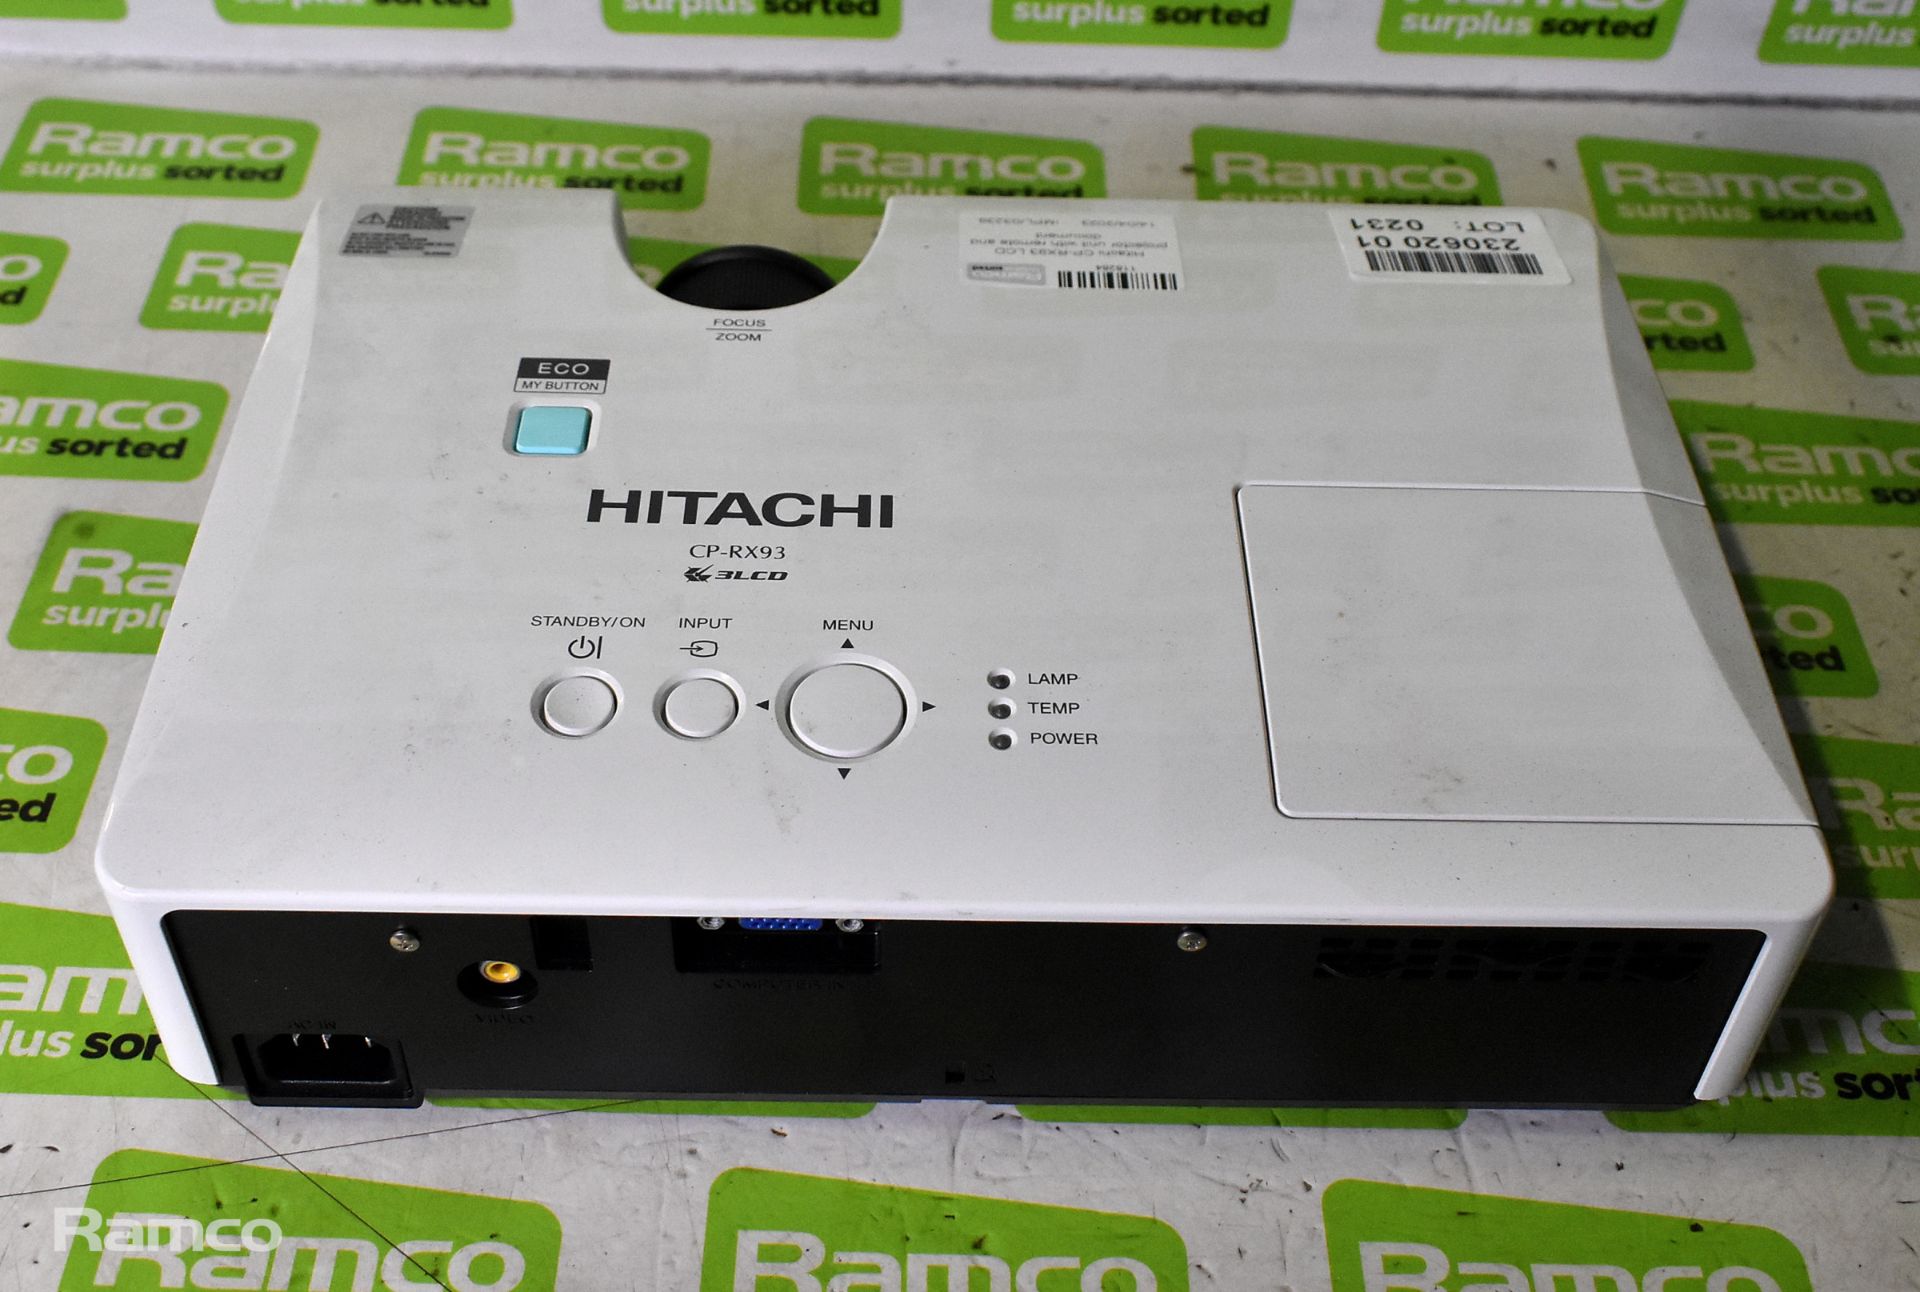 Hitachi CP-RX93 LCD projector unit with remote and document - Image 2 of 4